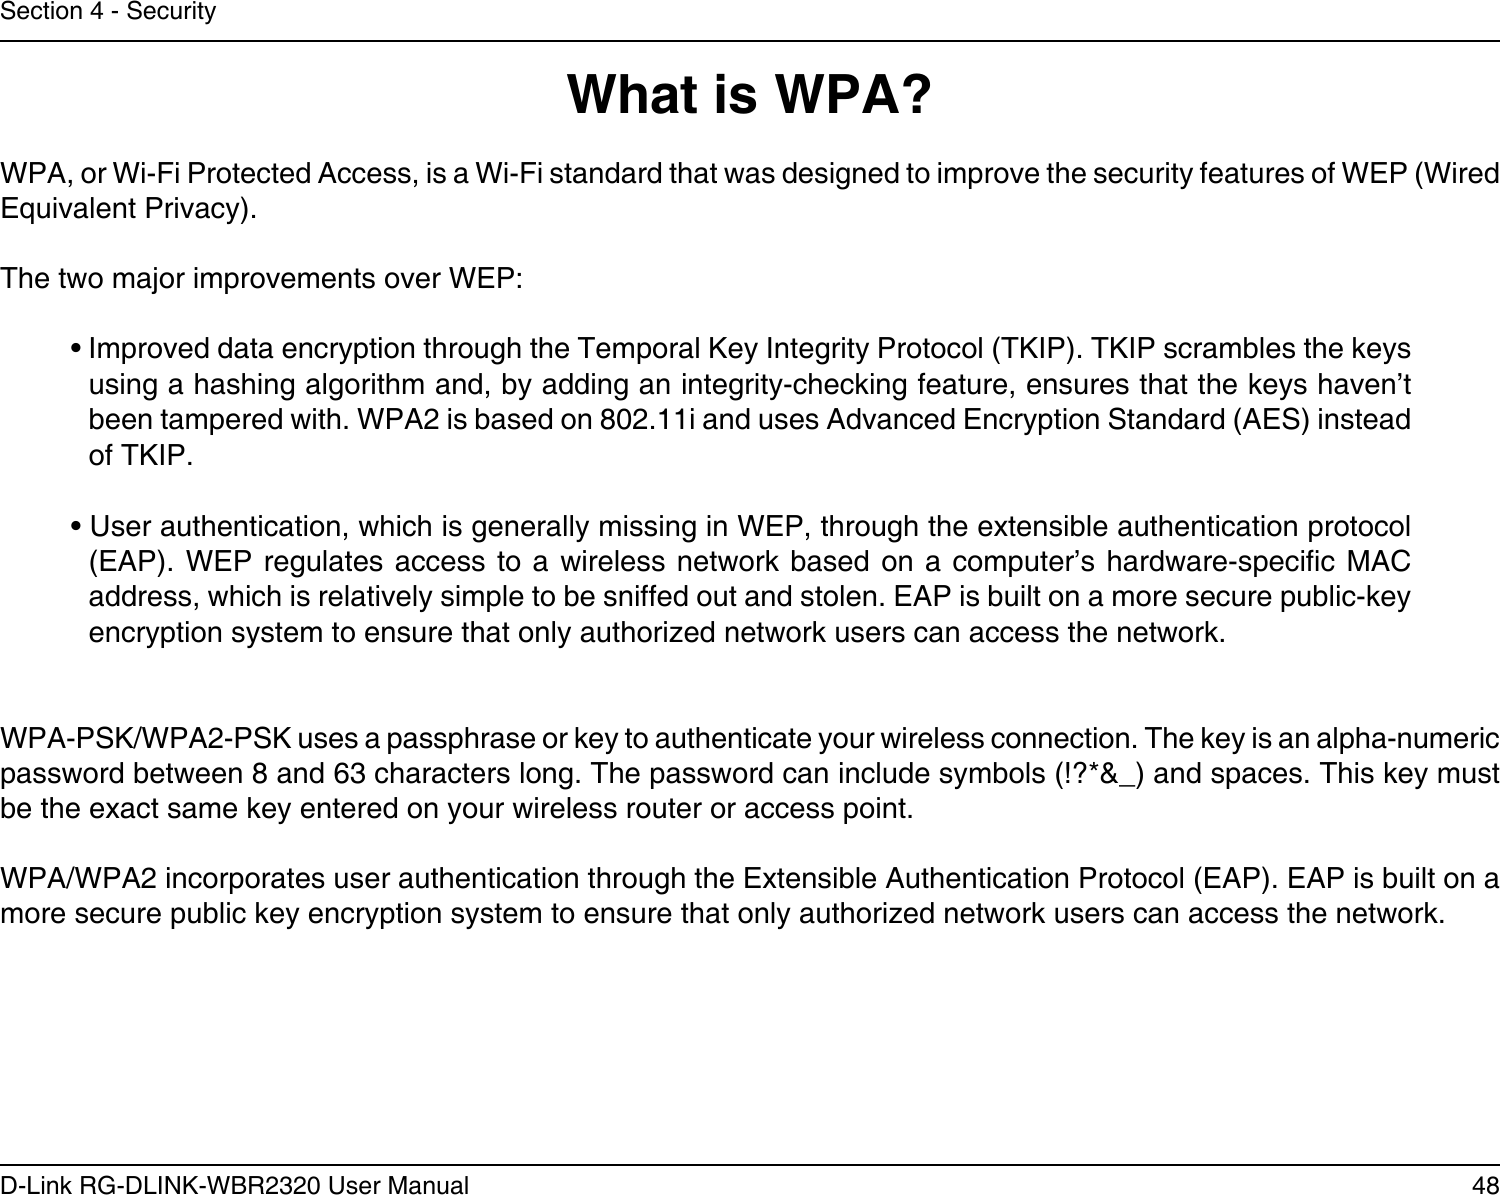 48D-Link RG-DLINK-WBR2320 User ManualSection 4 - SecurityWhat is WPA?WPA, or Wi-Fi Protected Access, is a Wi-Fi standard that was designed to improve the security features of WEP (Wired Equivalent Privacy).  The two major improvements over WEP: • Improved data encryption through the Temporal Key Integrity Protocol (TKIP). TKIP scrambles the keys using a hashing algorithm and, by adding an integrity-checking feature, ensures that the keys haven’t been tampered with. WPA2 is based on 802.11i and uses Advanced Encryption Standard (AES) instead of TKIP.• User authentication, which is generally missing in WEP, through the extensible authentication protocol (EAP). WEP regulates  access  to a wireless network based  on  a computer’s hardware-specic MAC address, which is relatively simple to be sniffed out and stolen. EAP is built on a more secure public-key encryption system to ensure that only authorized network users can access the network.WPA-PSK/WPA2-PSK uses a passphrase or key to authenticate your wireless connection. The key is an alpha-numeric password between 8 and 63 characters long. The password can include symbols (!?*&amp;_) and spaces. This key must be the exact same key entered on your wireless router or access point.WPA/WPA2 incorporates user authentication through the Extensible Authentication Protocol (EAP). EAP is built on a more secure public key encryption system to ensure that only authorized network users can access the network.